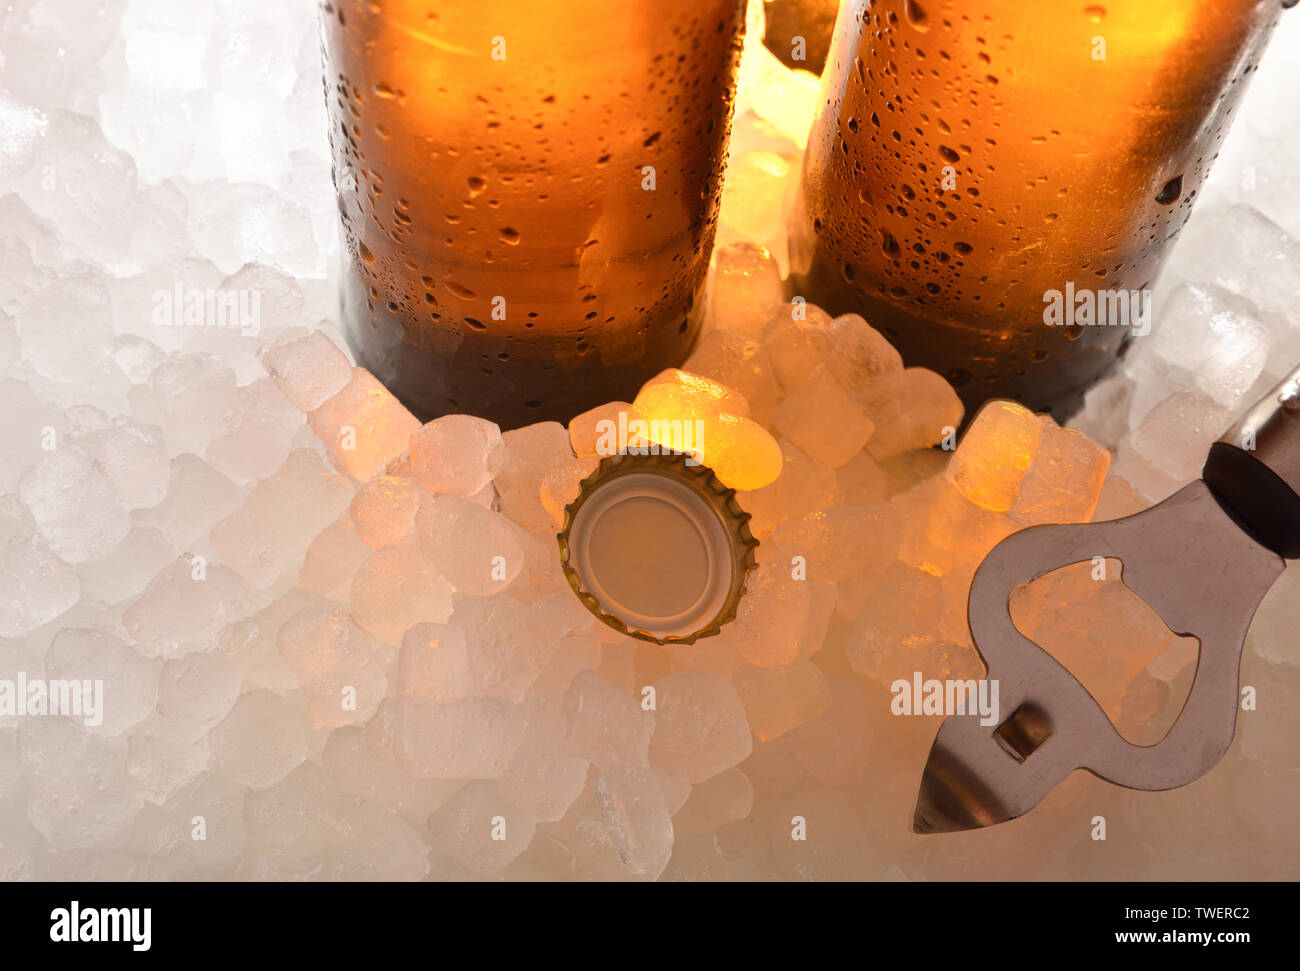 Beer glass bottles on ice with cap and bottle opener . Horizontal composition. Elevated view. Stock Photo